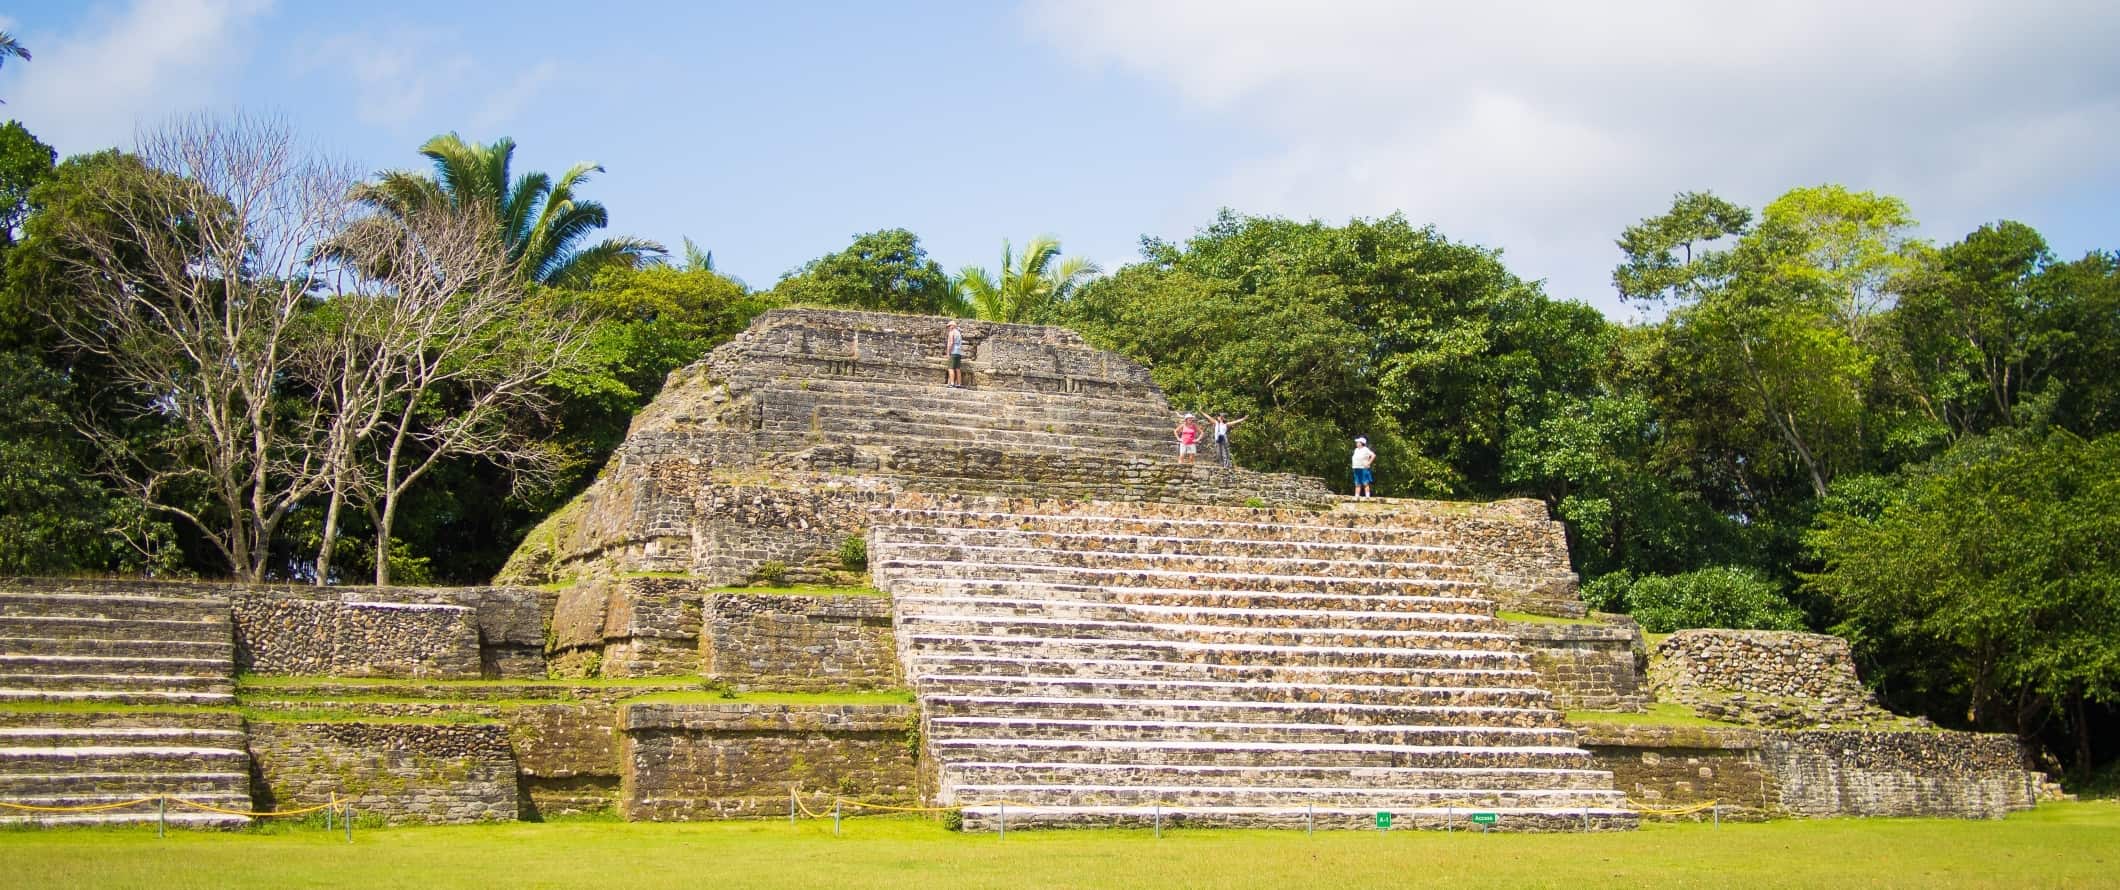 people walking around on top of the tiered pyramids of Mayan ruins, Altun Ha, in Belize